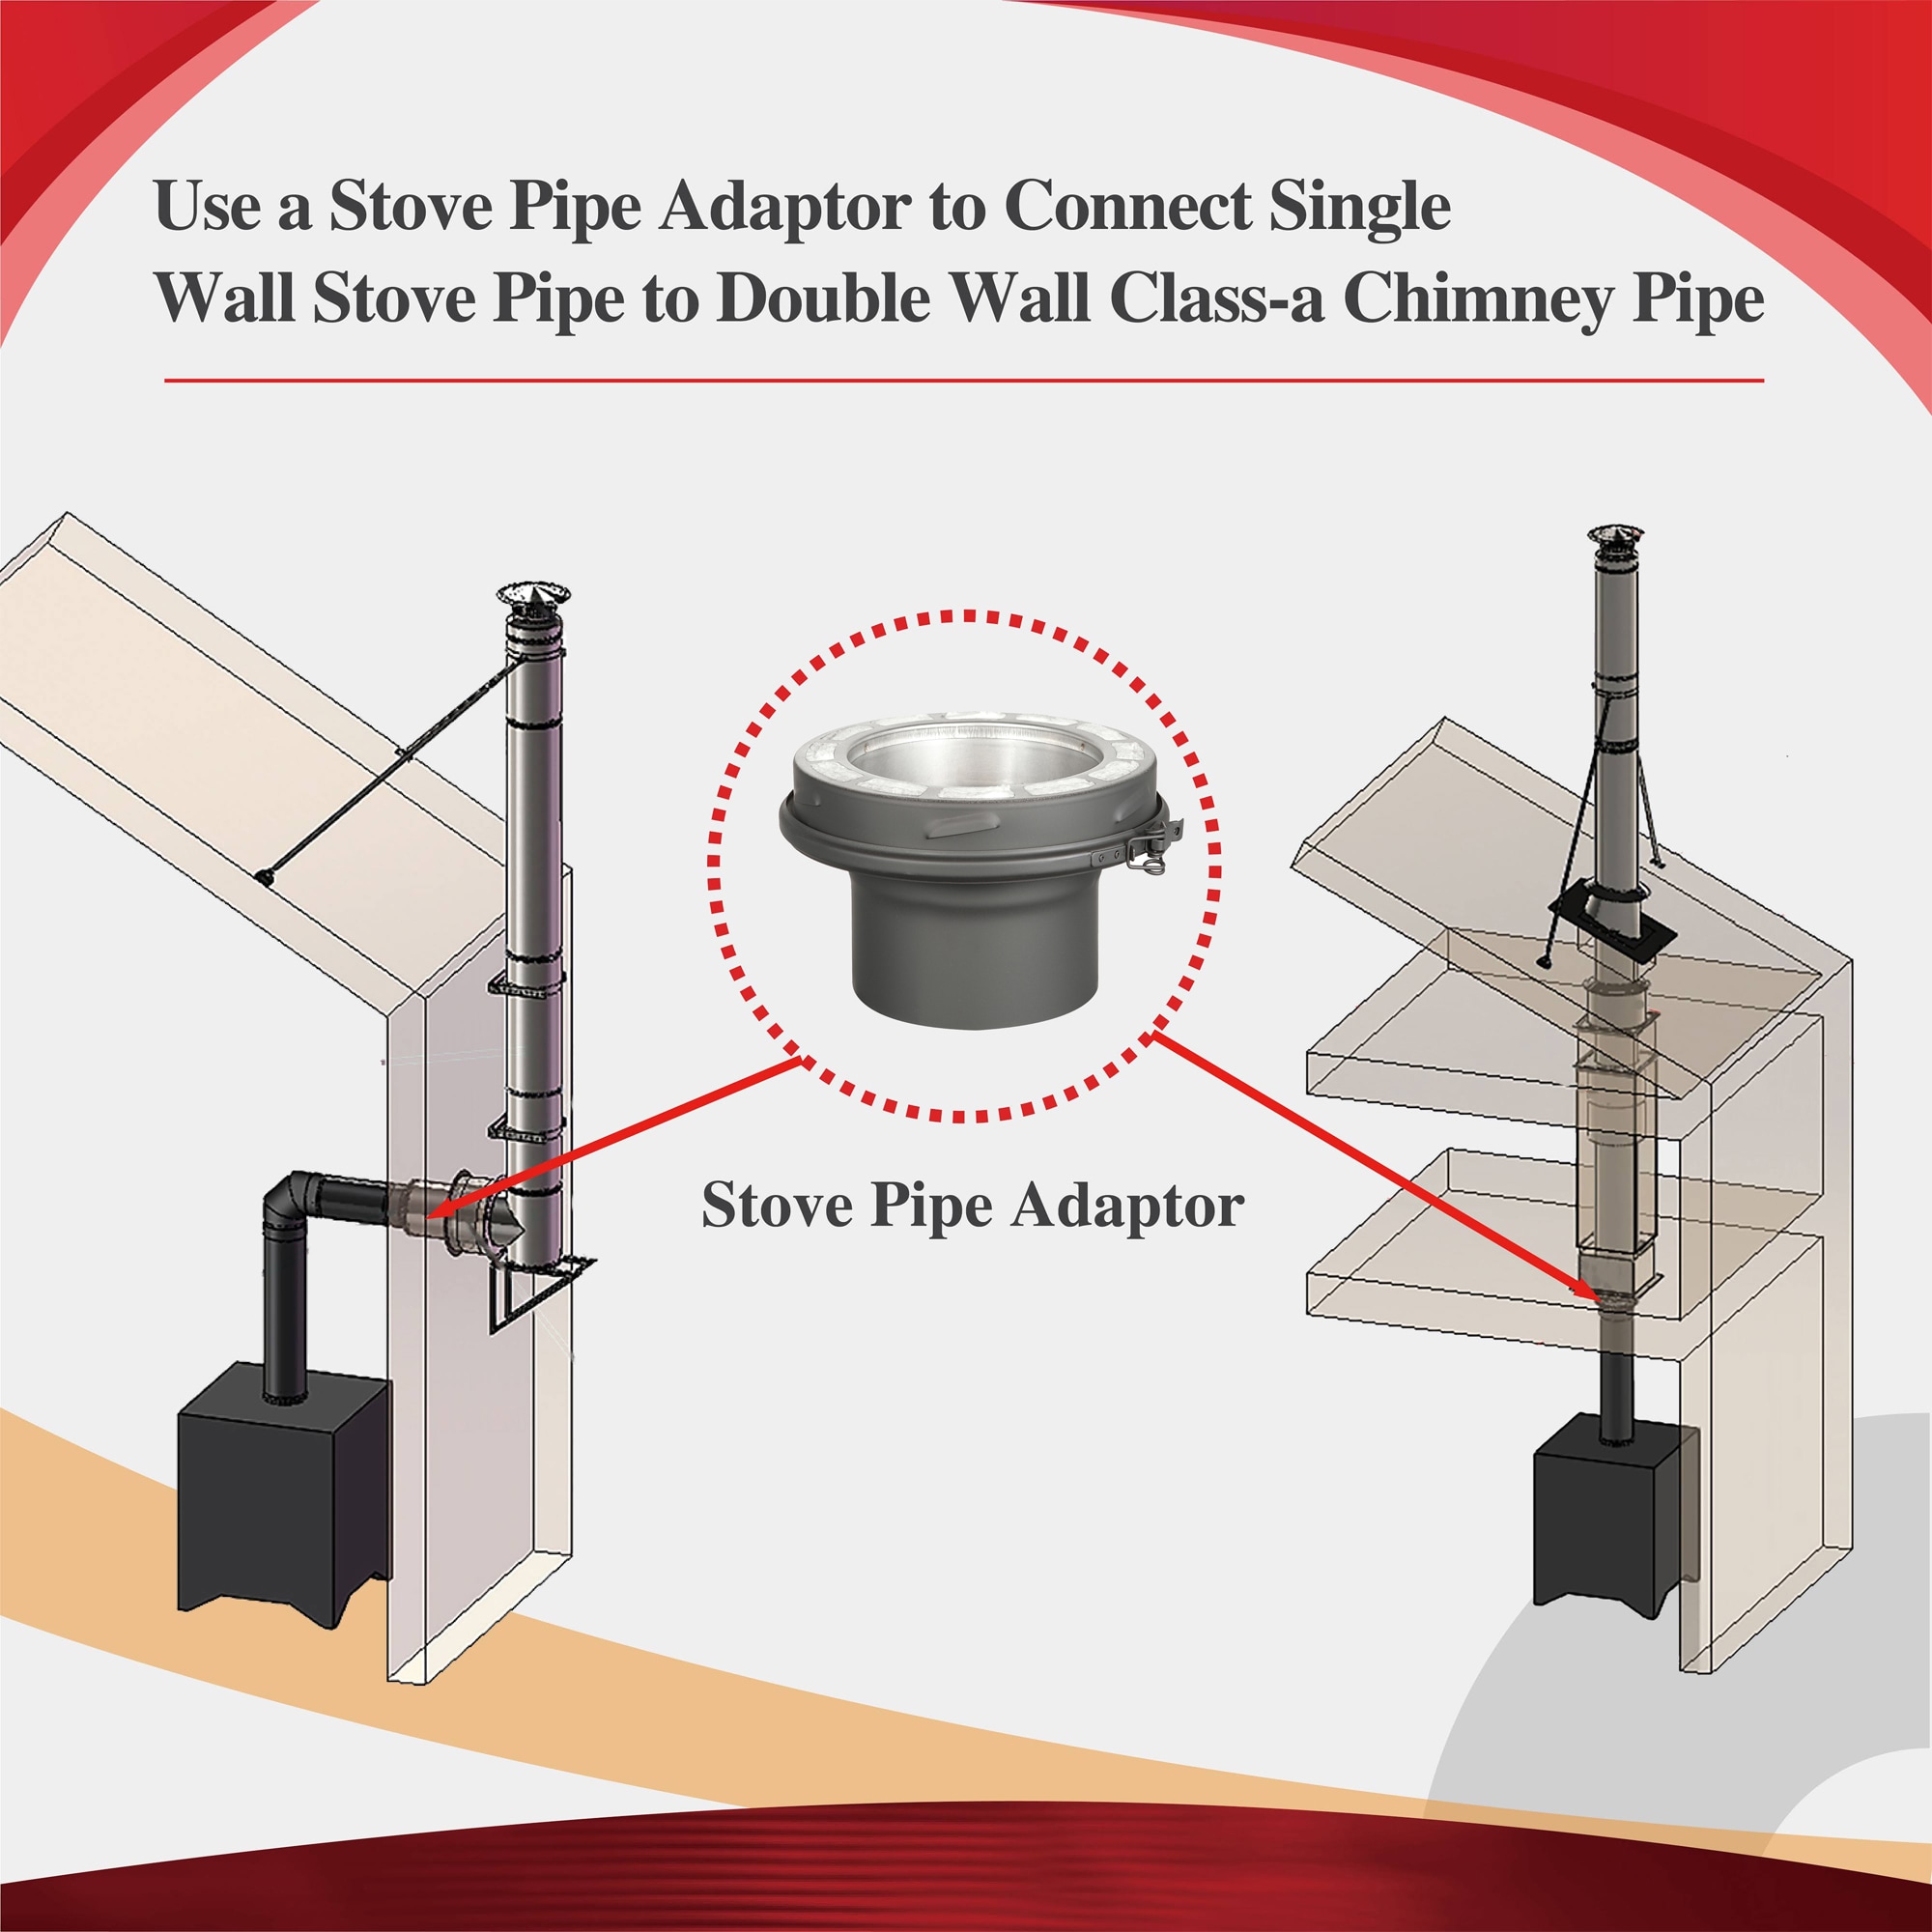 AllFuel HST Stove Pipe Adaptor for 6 Diameter 304 Stainless Steel All Fuel  Class-A Double Wall Insulated Chimney Pipe